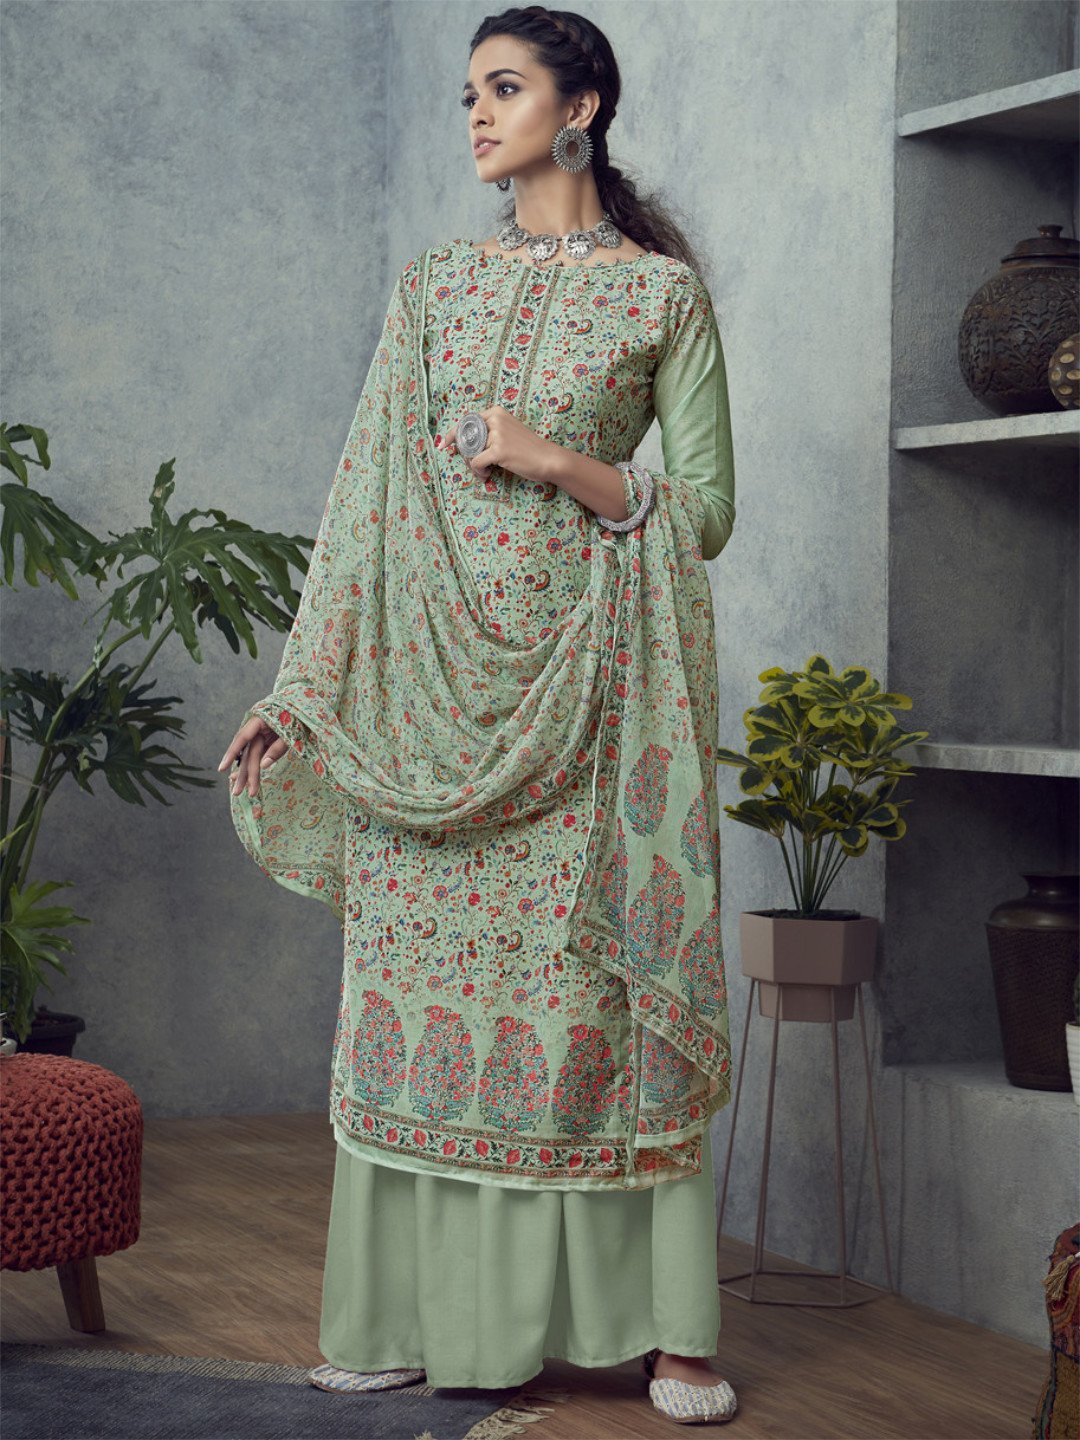 Printed Un-Stitched Light Green Palazzo Suit with Dupatta - Stilento